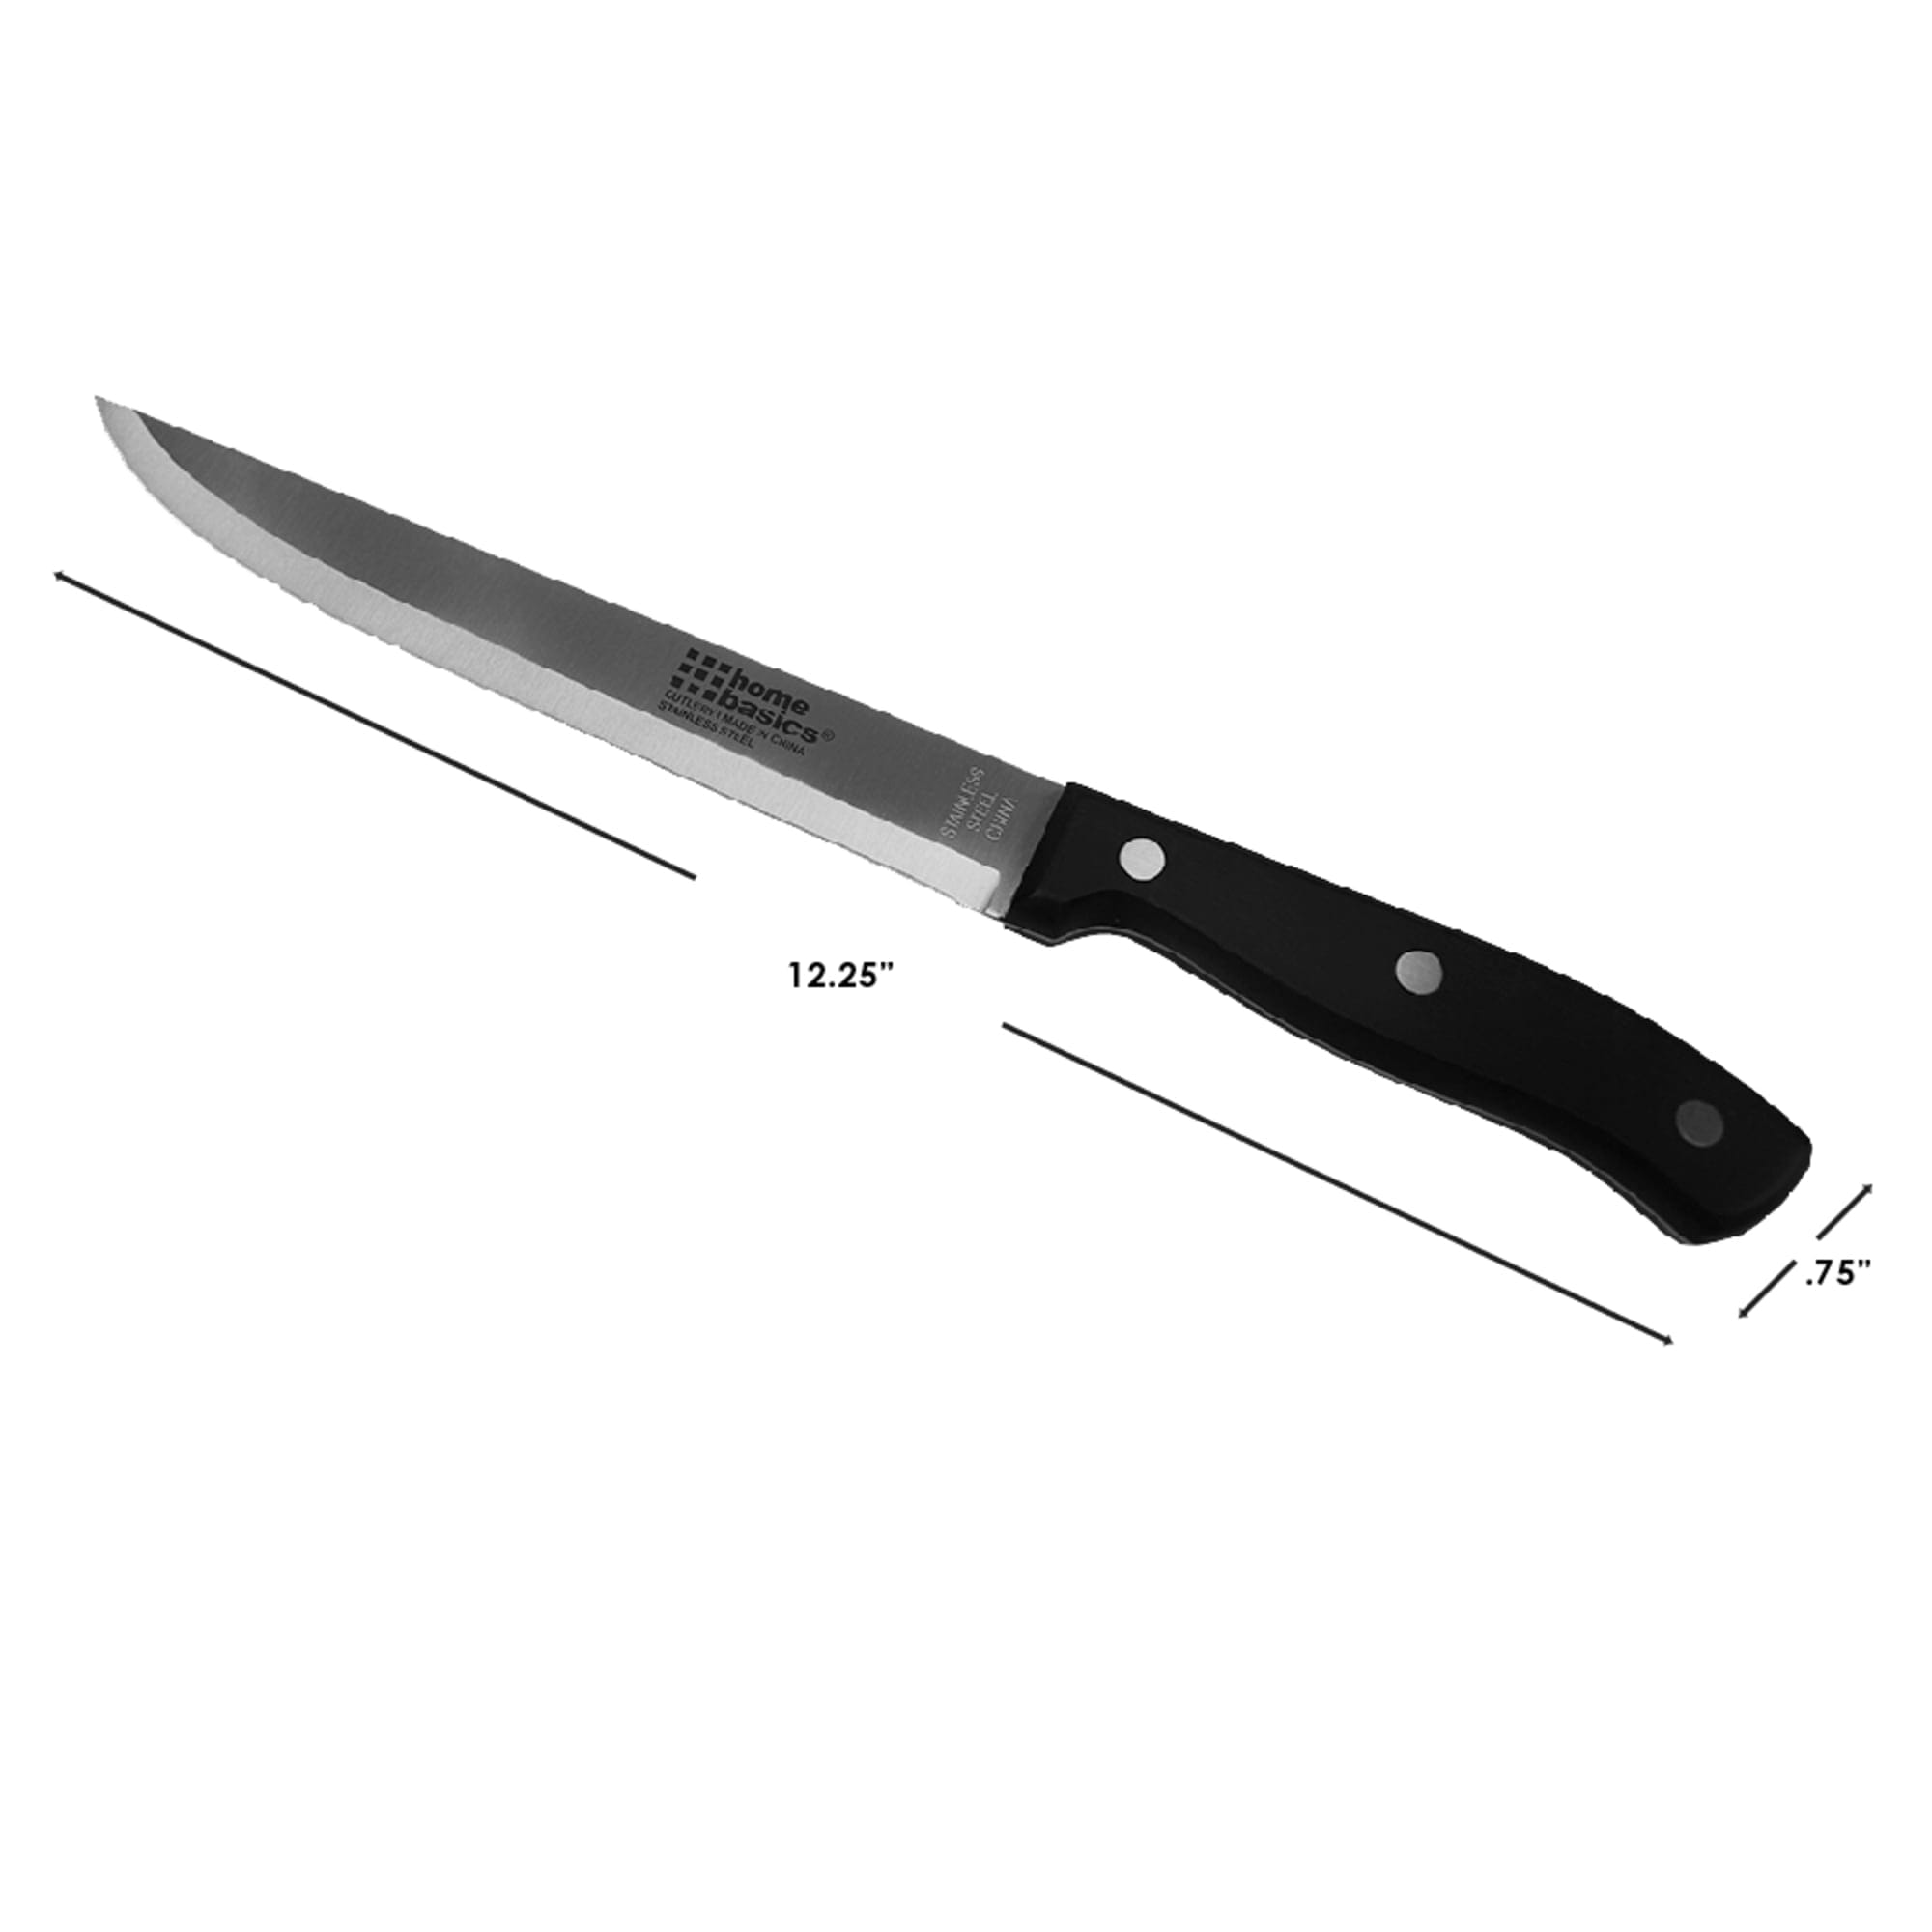 Home Basics 8" Stainless Steel Carving Knife with Contoured Bakelite Handle, Black $2.50 EACH, CASE PACK OF 24